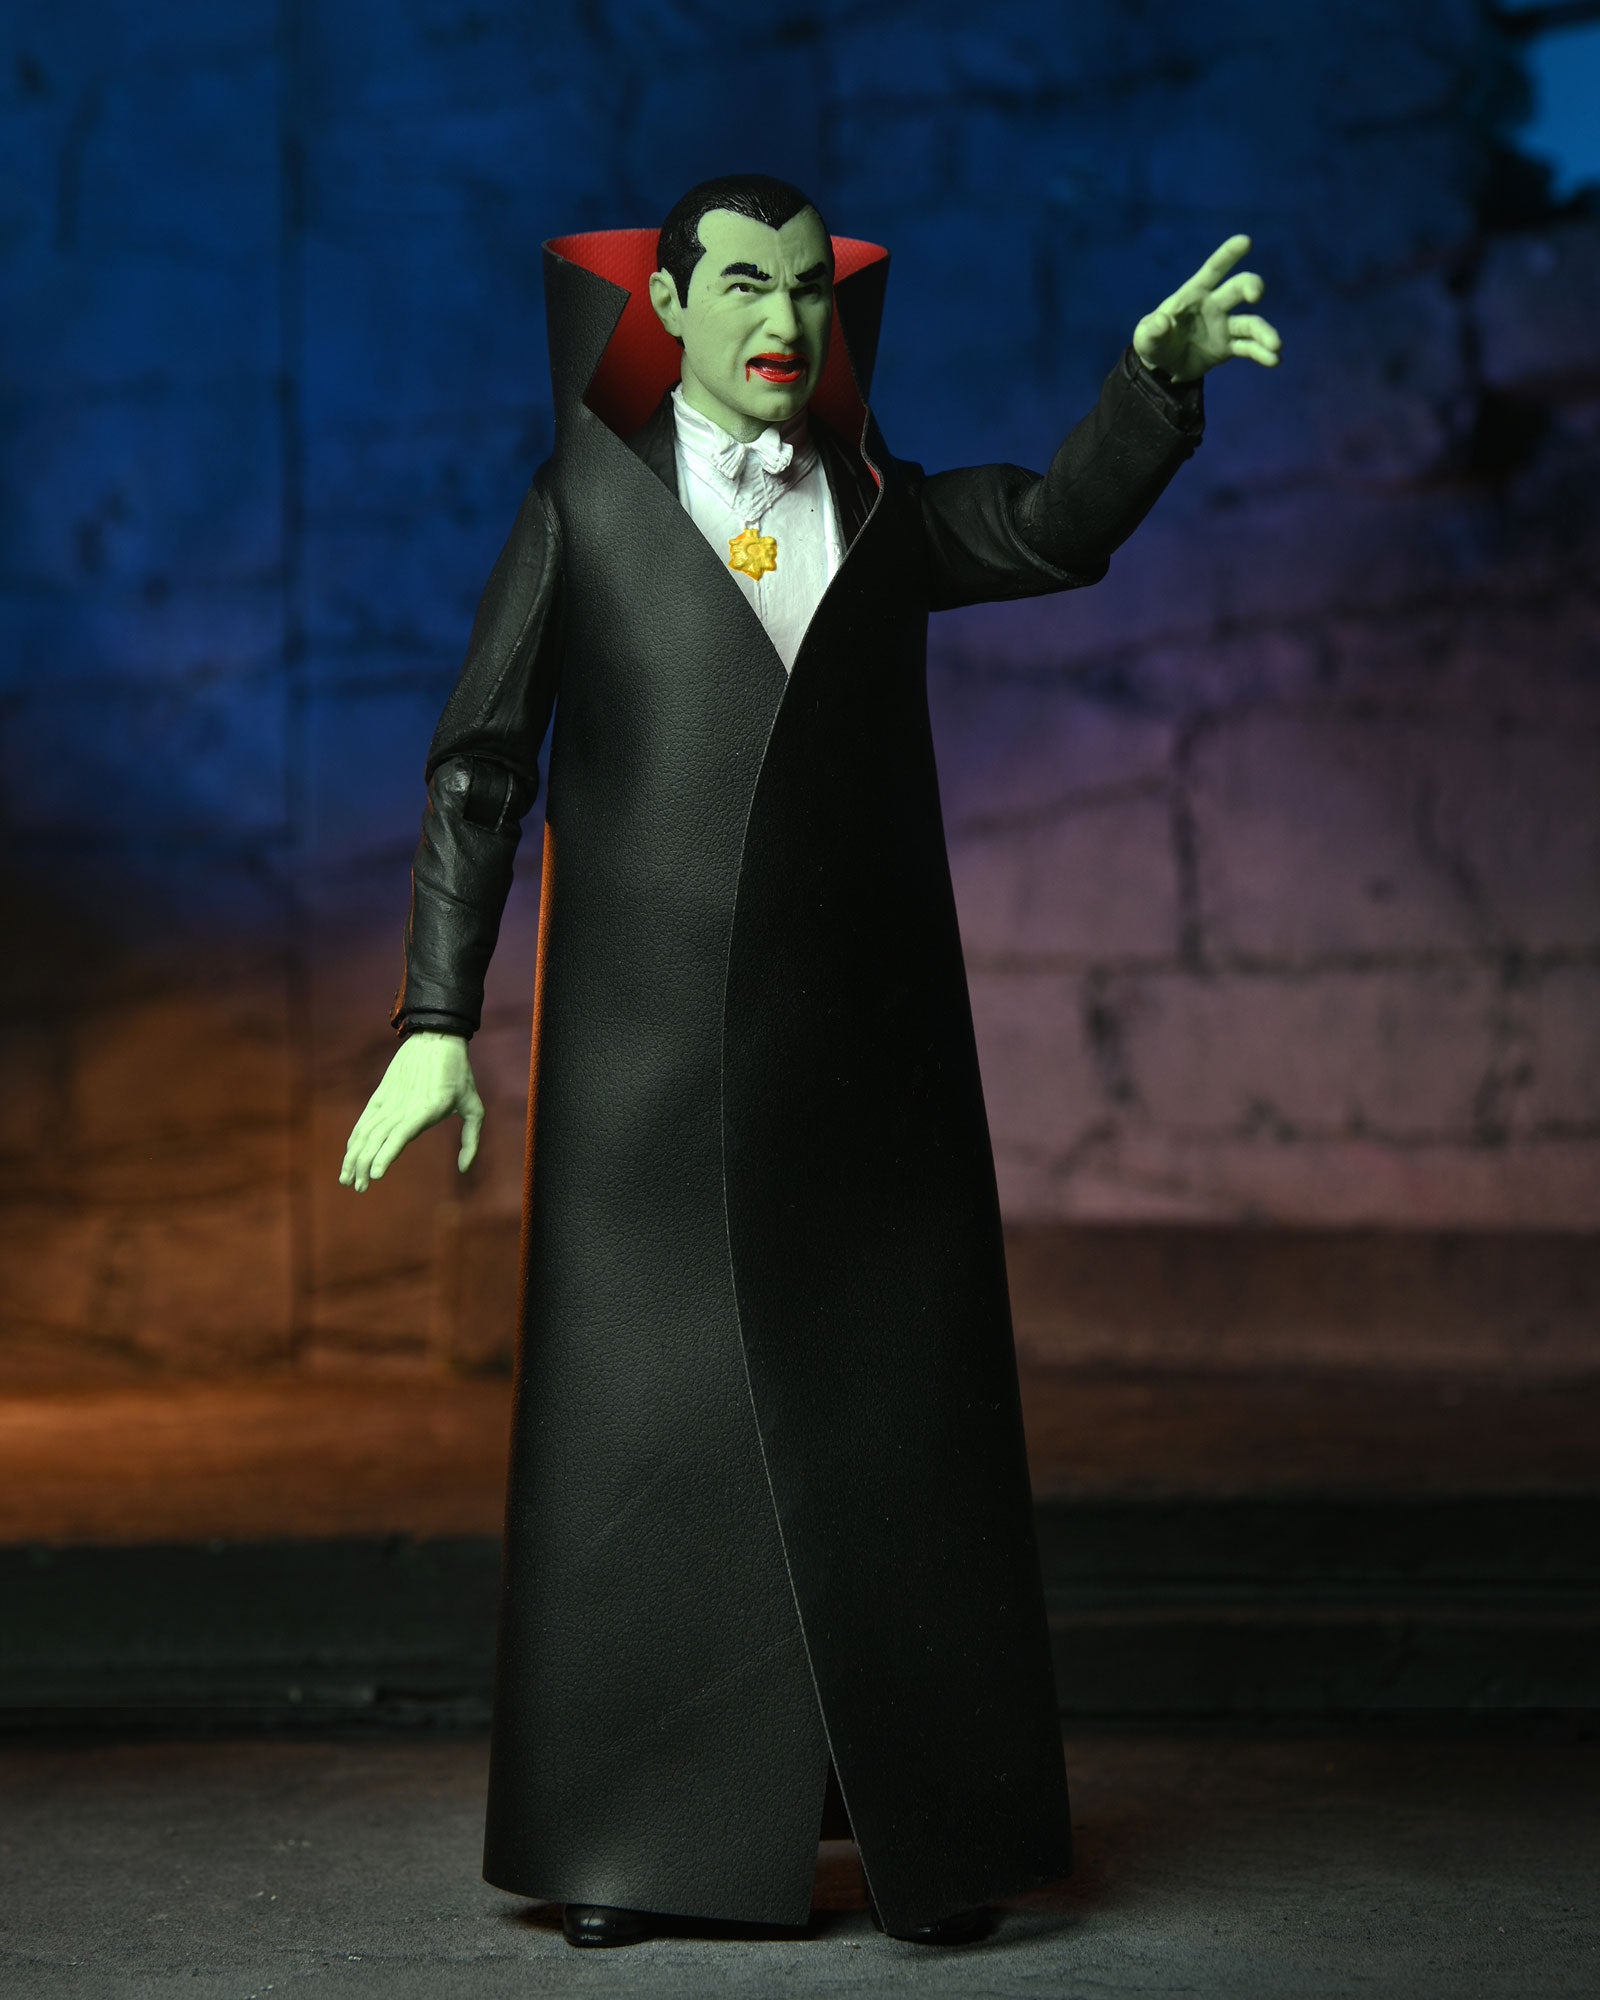 Universal Monsters - Glow-in-the-Dark Retro Dracula 7” Scale Action Figure pointing 